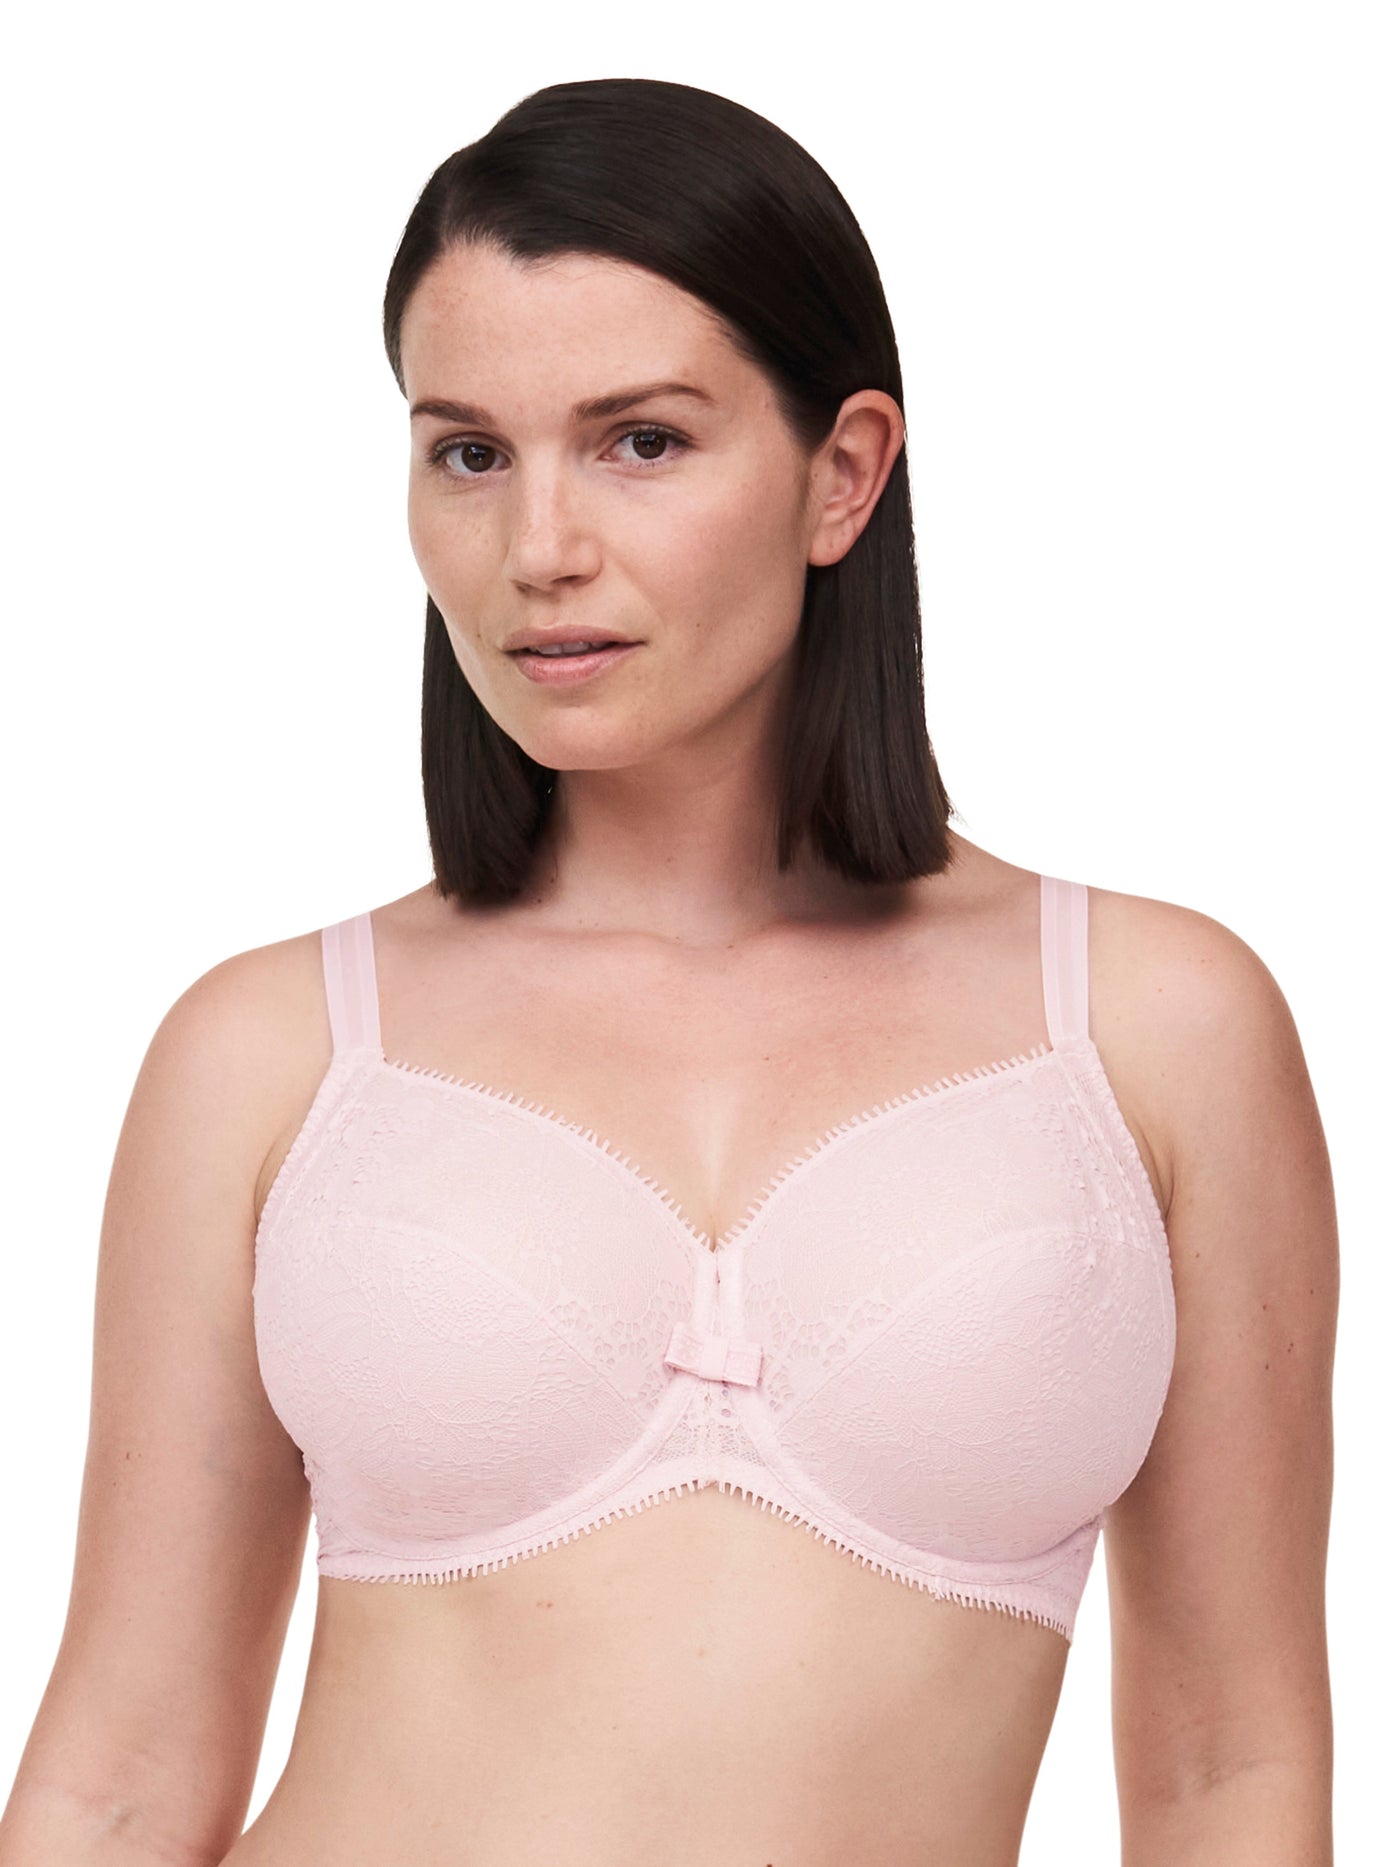 Chantelle Day To Night Very Covering Underwired Bra - Porcelain Pink Full Cup Bra Chantelle 